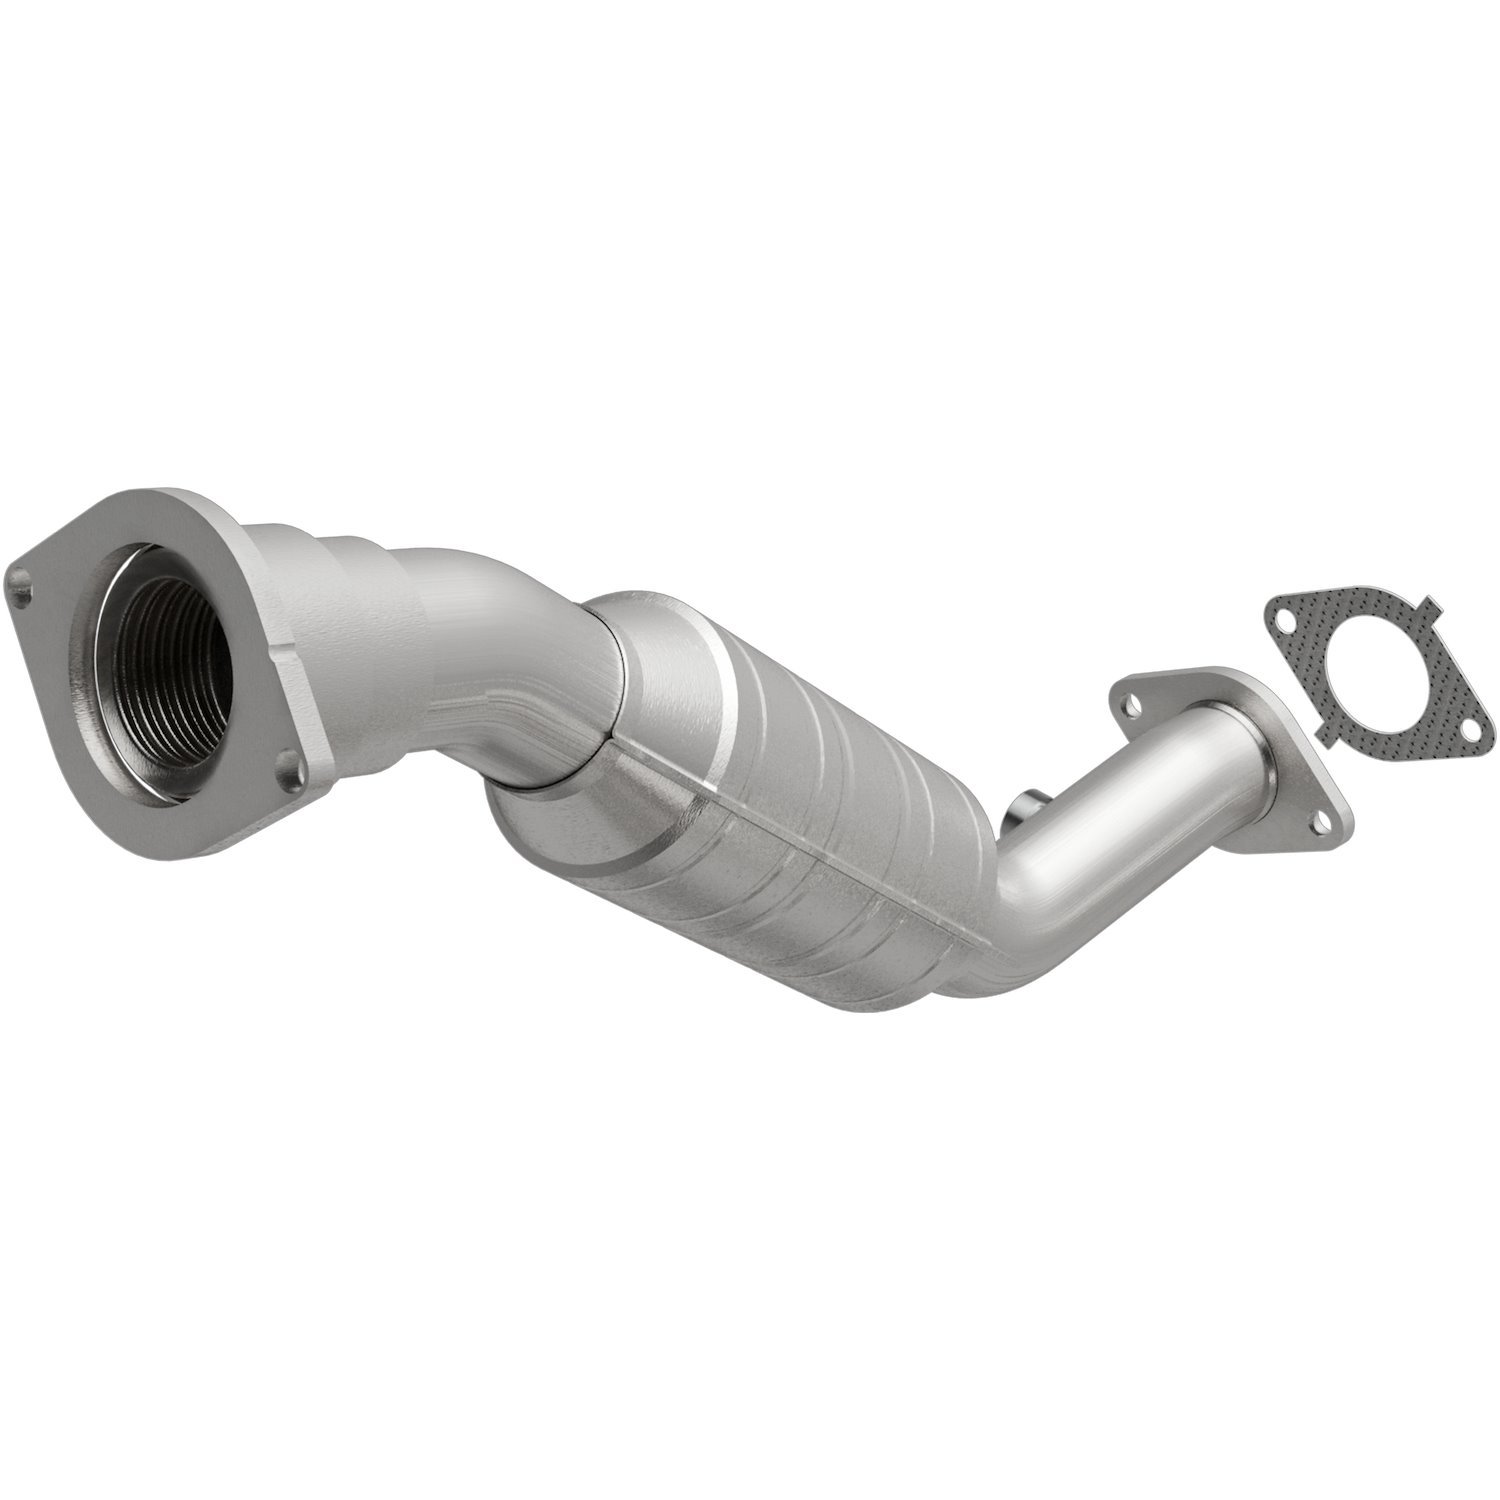 2006-2008 Buick Lucerne OEM Grade Federal / EPA Compliant Direct-Fit Catalytic Converter